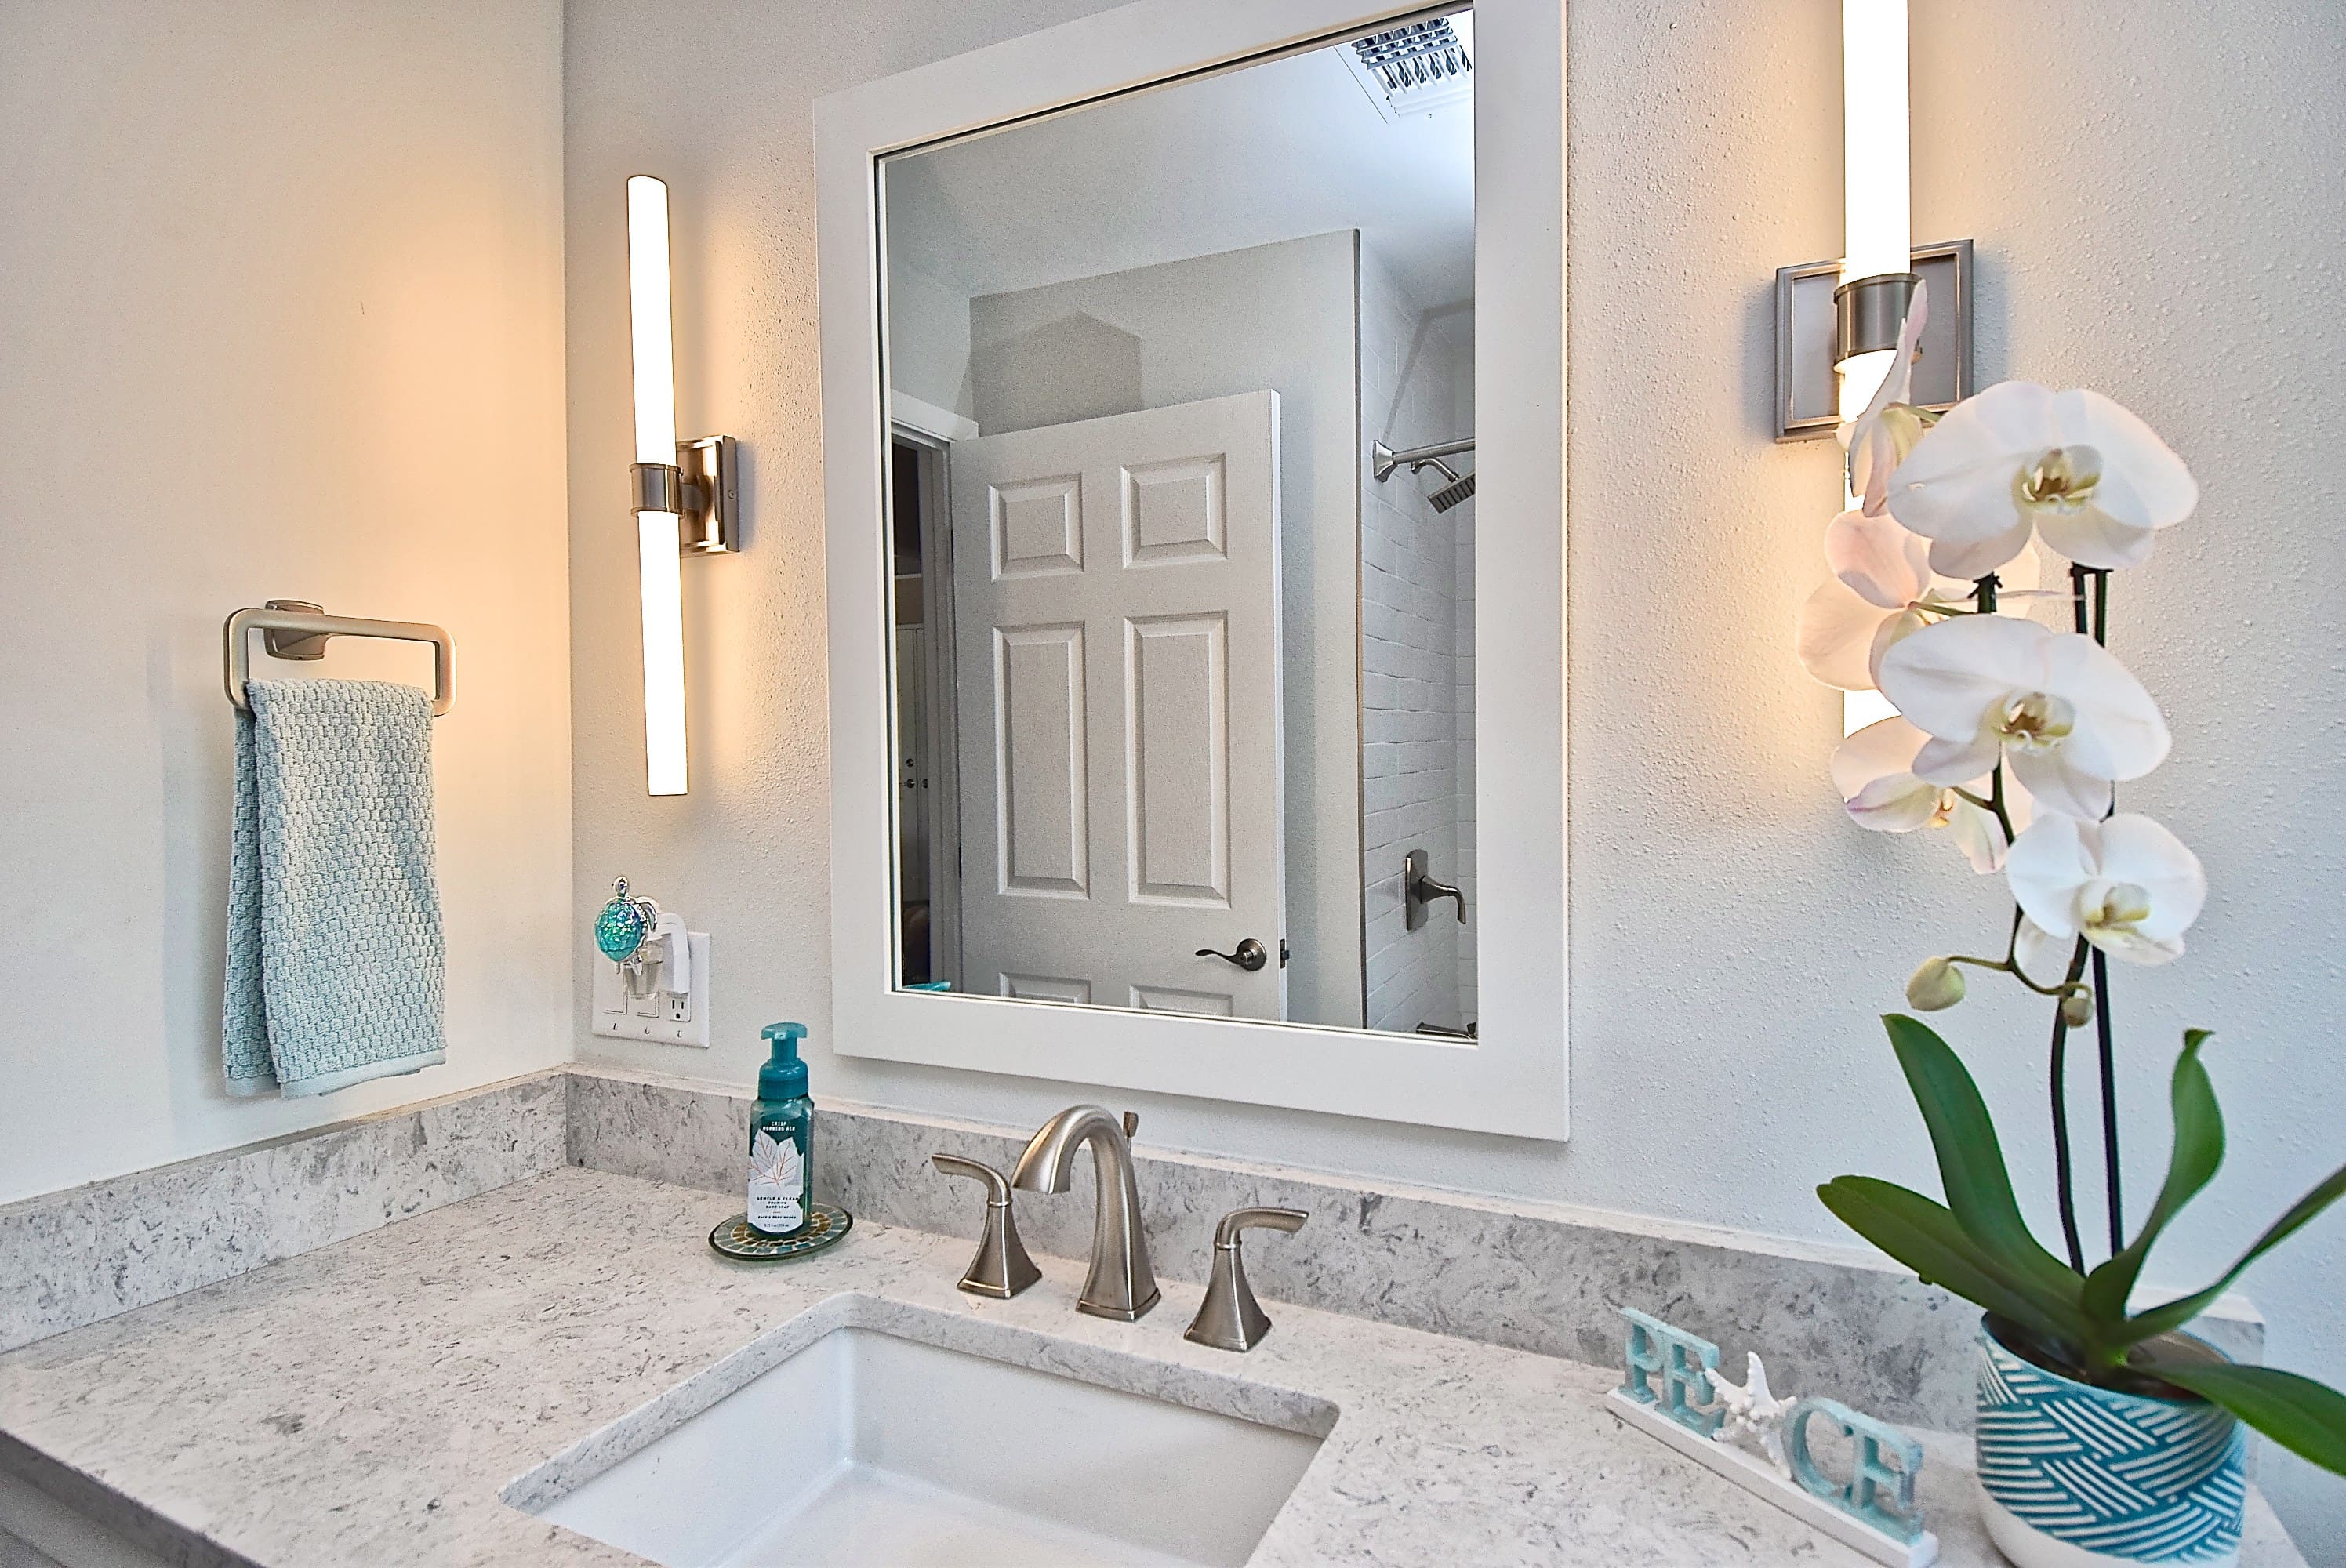 Remodeled Bathroom in Sarasota with White Marbled Countertops and Bar Sconce Lighting